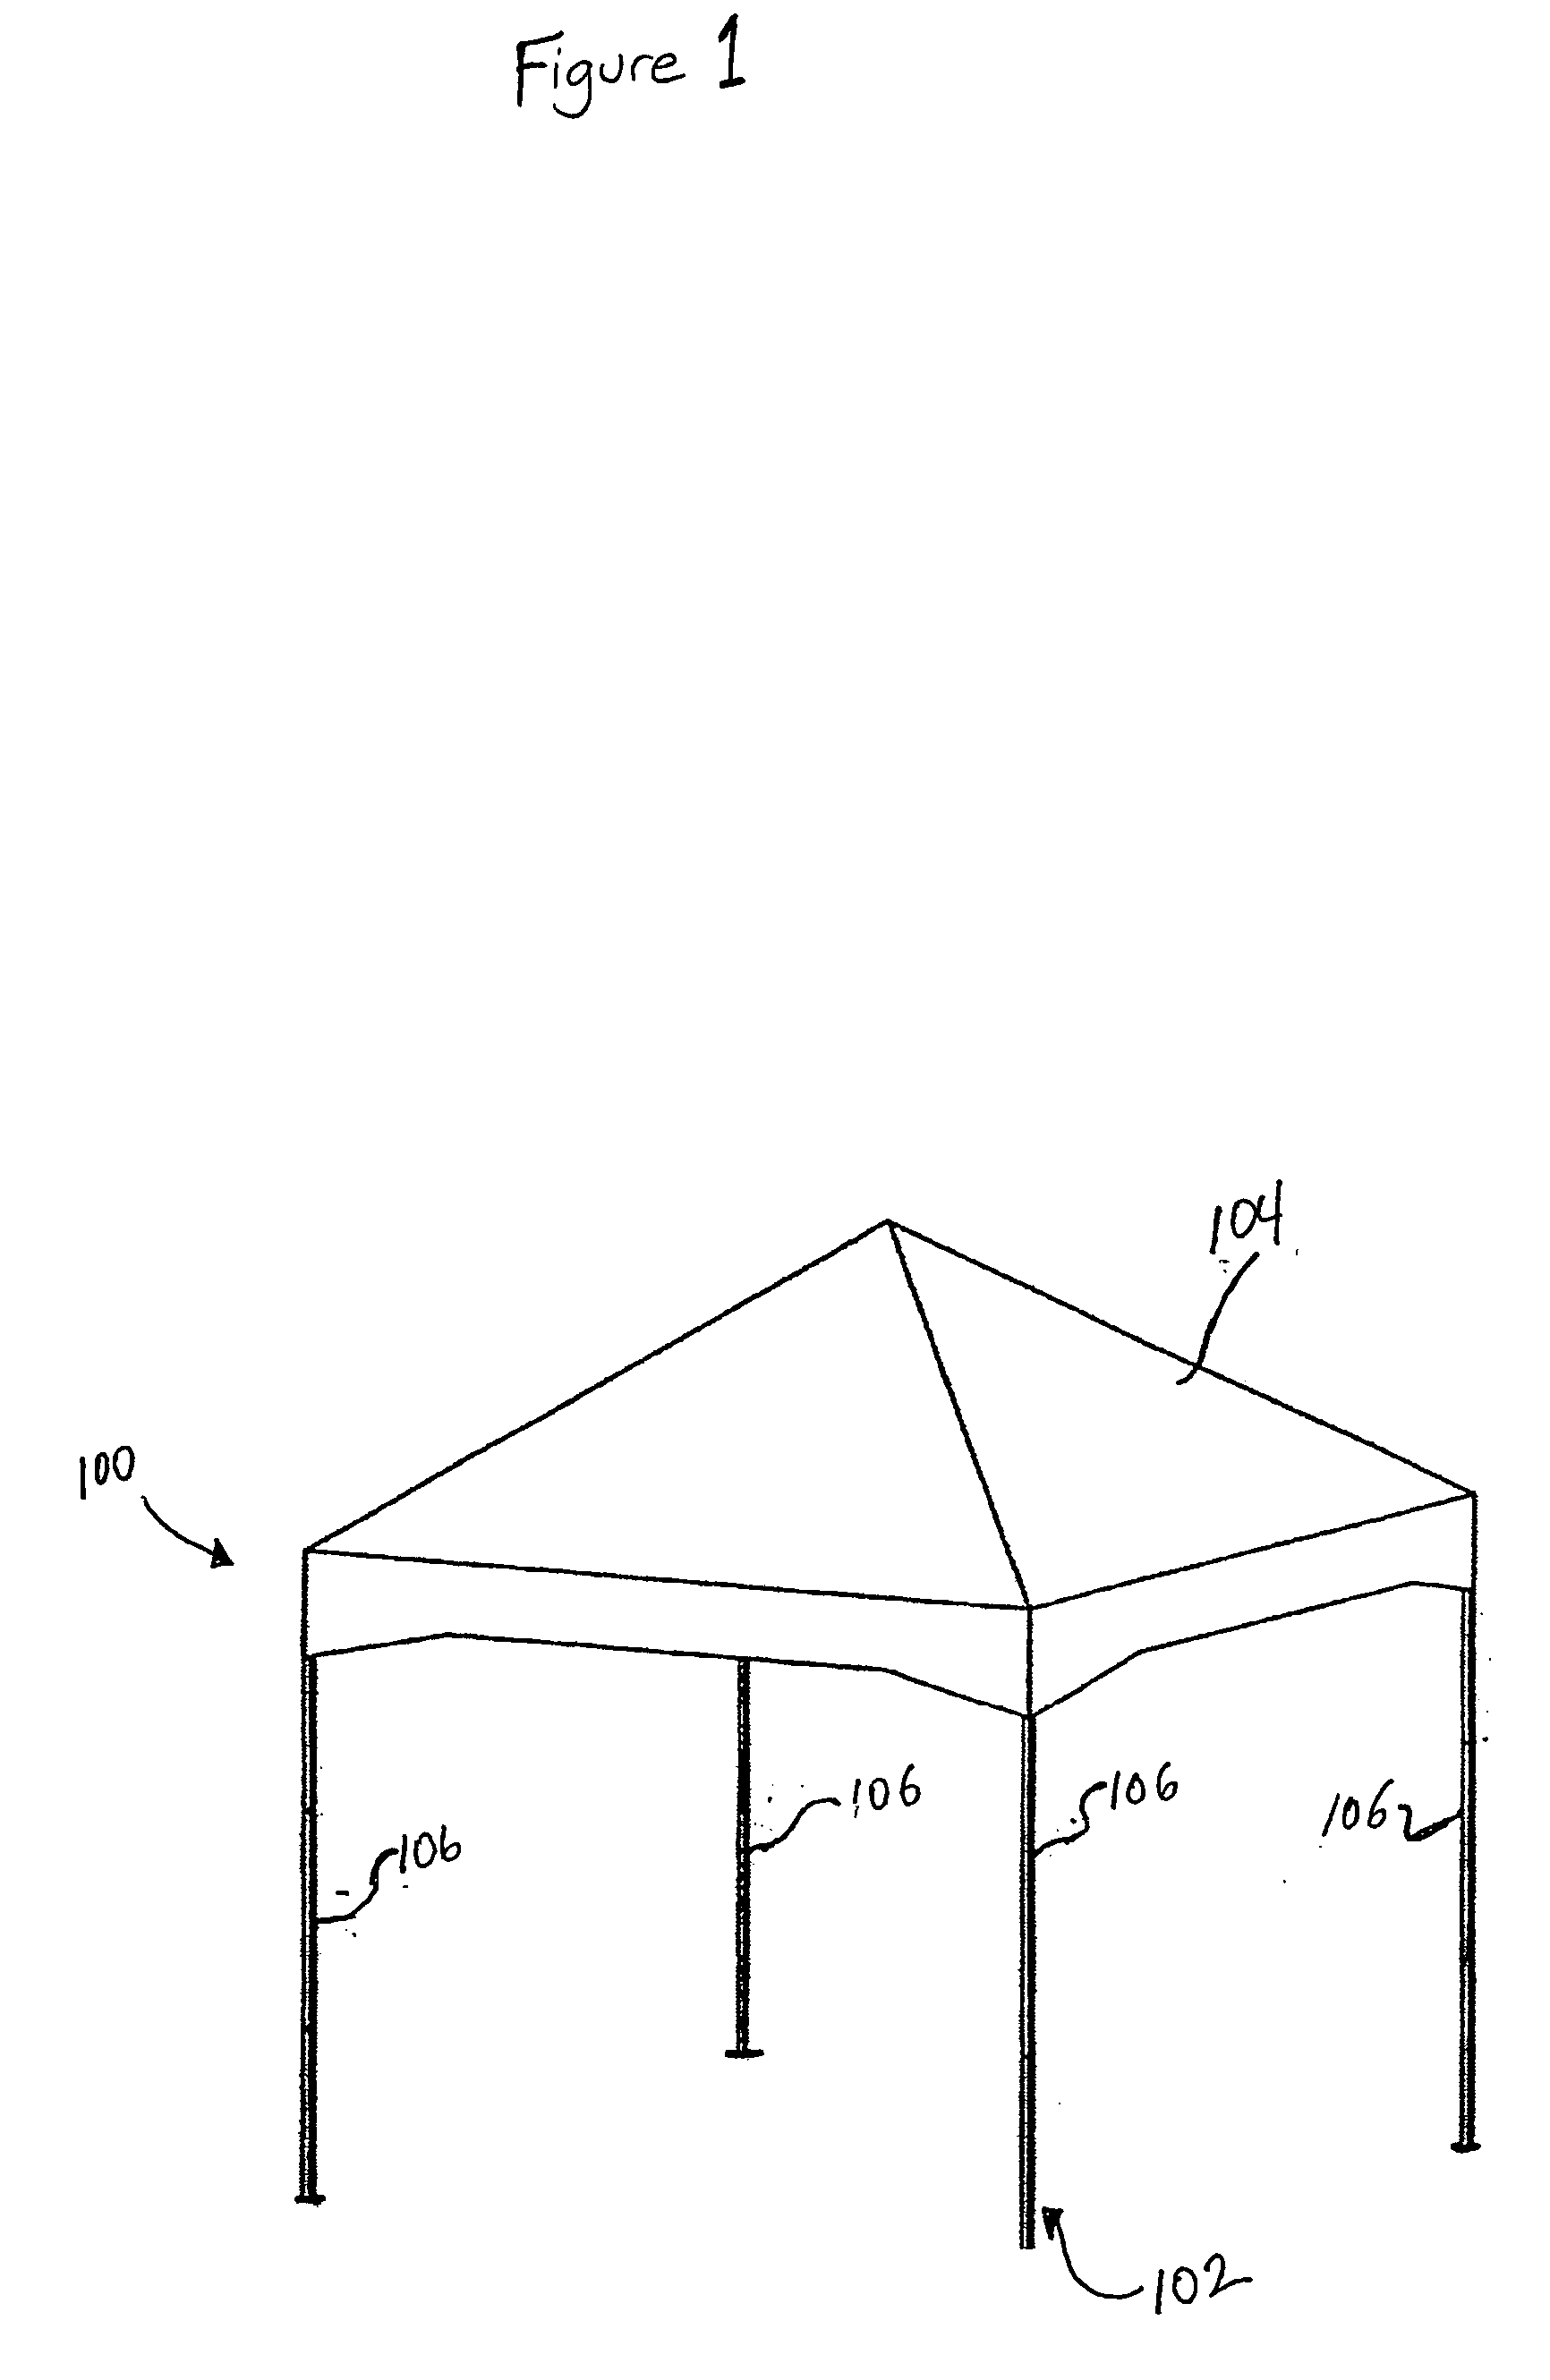 Collapsible shelter having a reinforced truss and telescoping leg